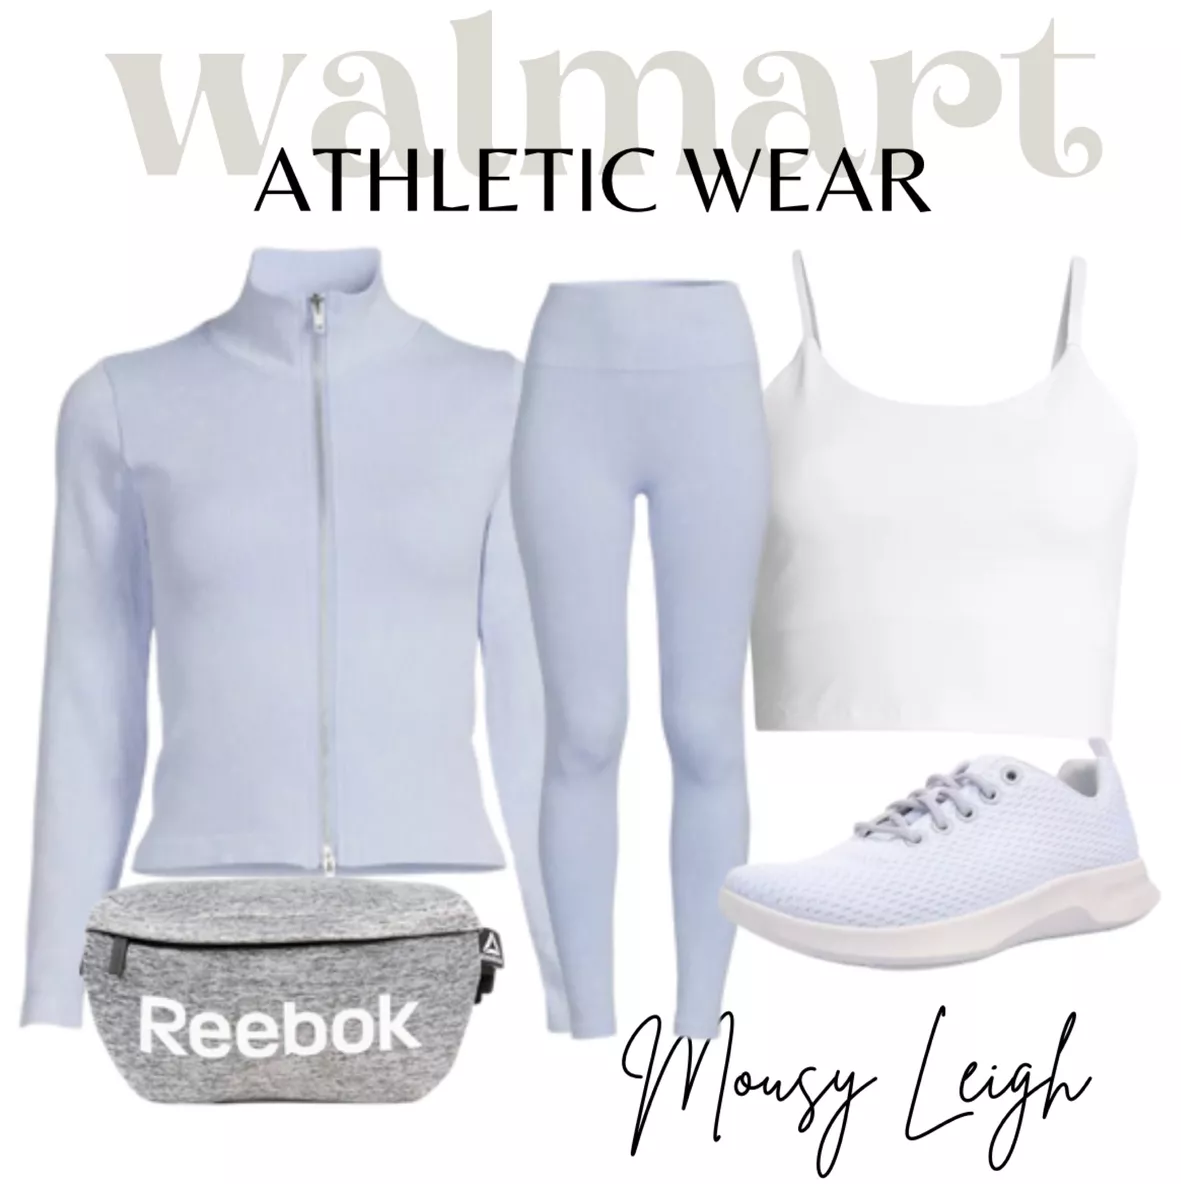 Women's Sportswear and Active Wear #athletic #shorts #outfit